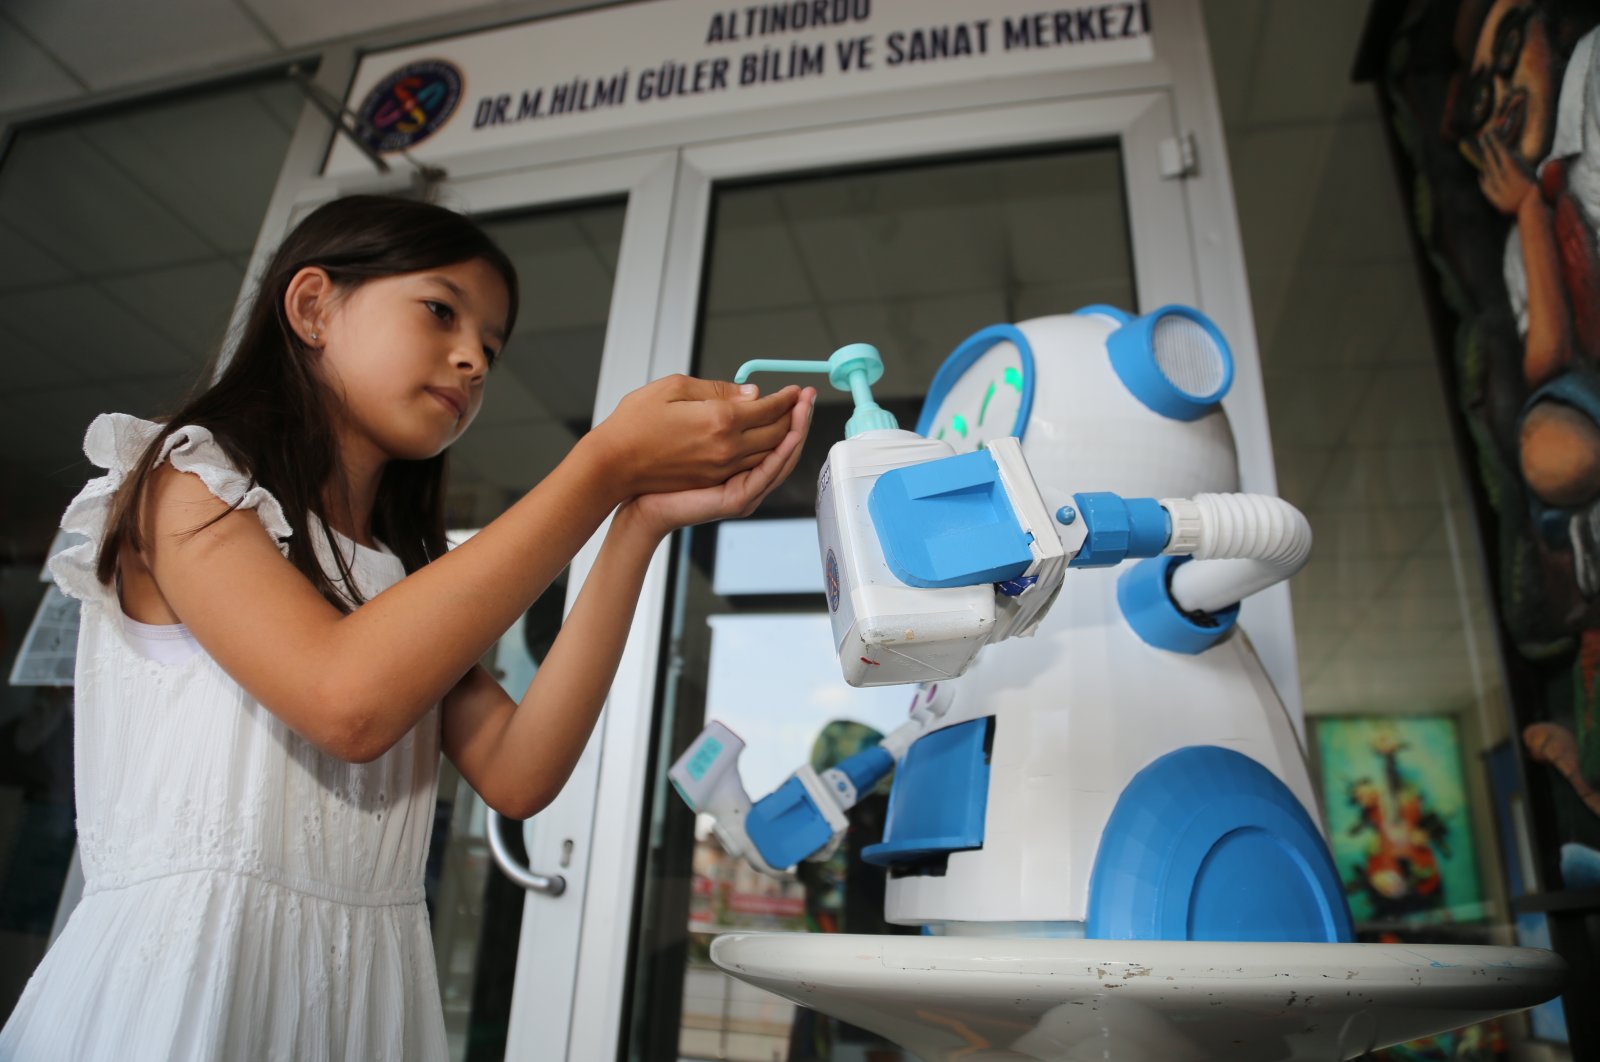 The robot pours disinfectant into the hand of a girl in Ordu, northern Turkey, Aug. 12, 2020. (AA Photo)